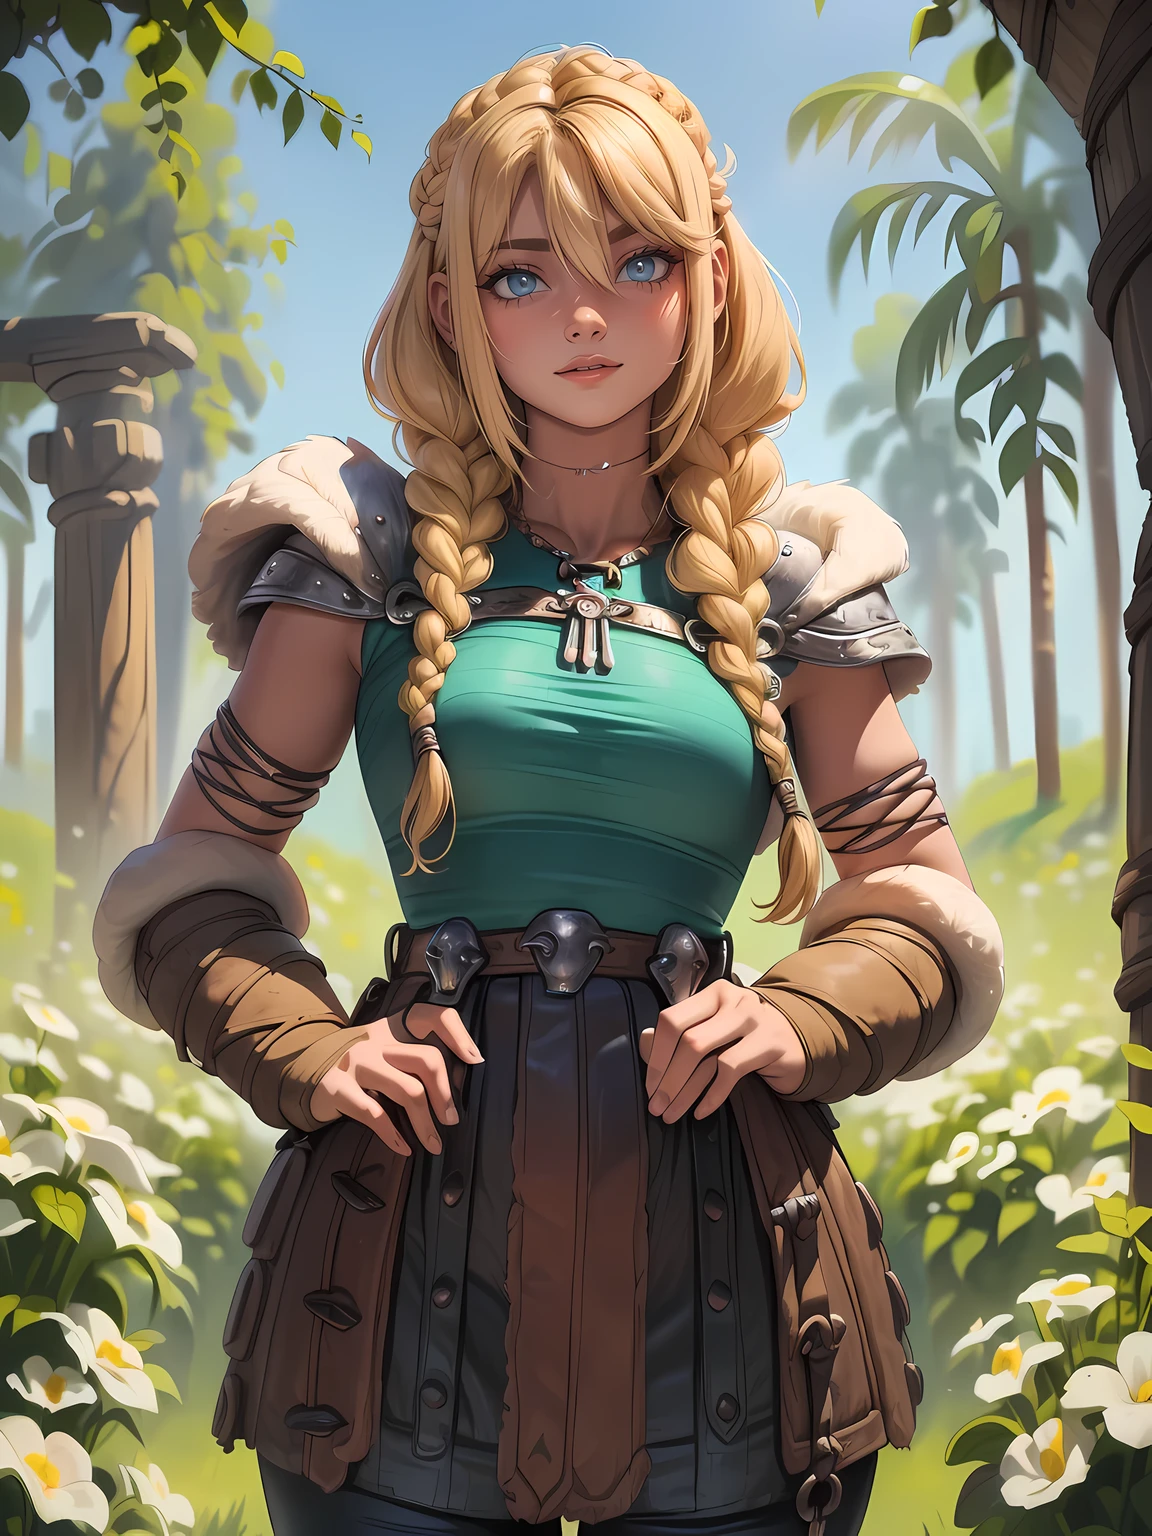 (((masterpiece, top quality, Best Quality, official art, beautiful and aesthetic:1.2))), (((1 girl, Alone, Astrid))), (((Long yellowish blonde hair with braids))), (((extremely detailed))), (((portrait))), (((looking at the viewer))), (((Whole body:0.7))), (((Detailed background of a Viking village))), (((close up))), (((mischievous eyes, naughty face, flirtatious smile))), (((tender))), (((mysterious))), (((walking))), (((developer))), (((Wearing Viking clothes))), ((((giant breasts, neckline, skin denture)))), (((Thin waist, thin hips, long legs))).